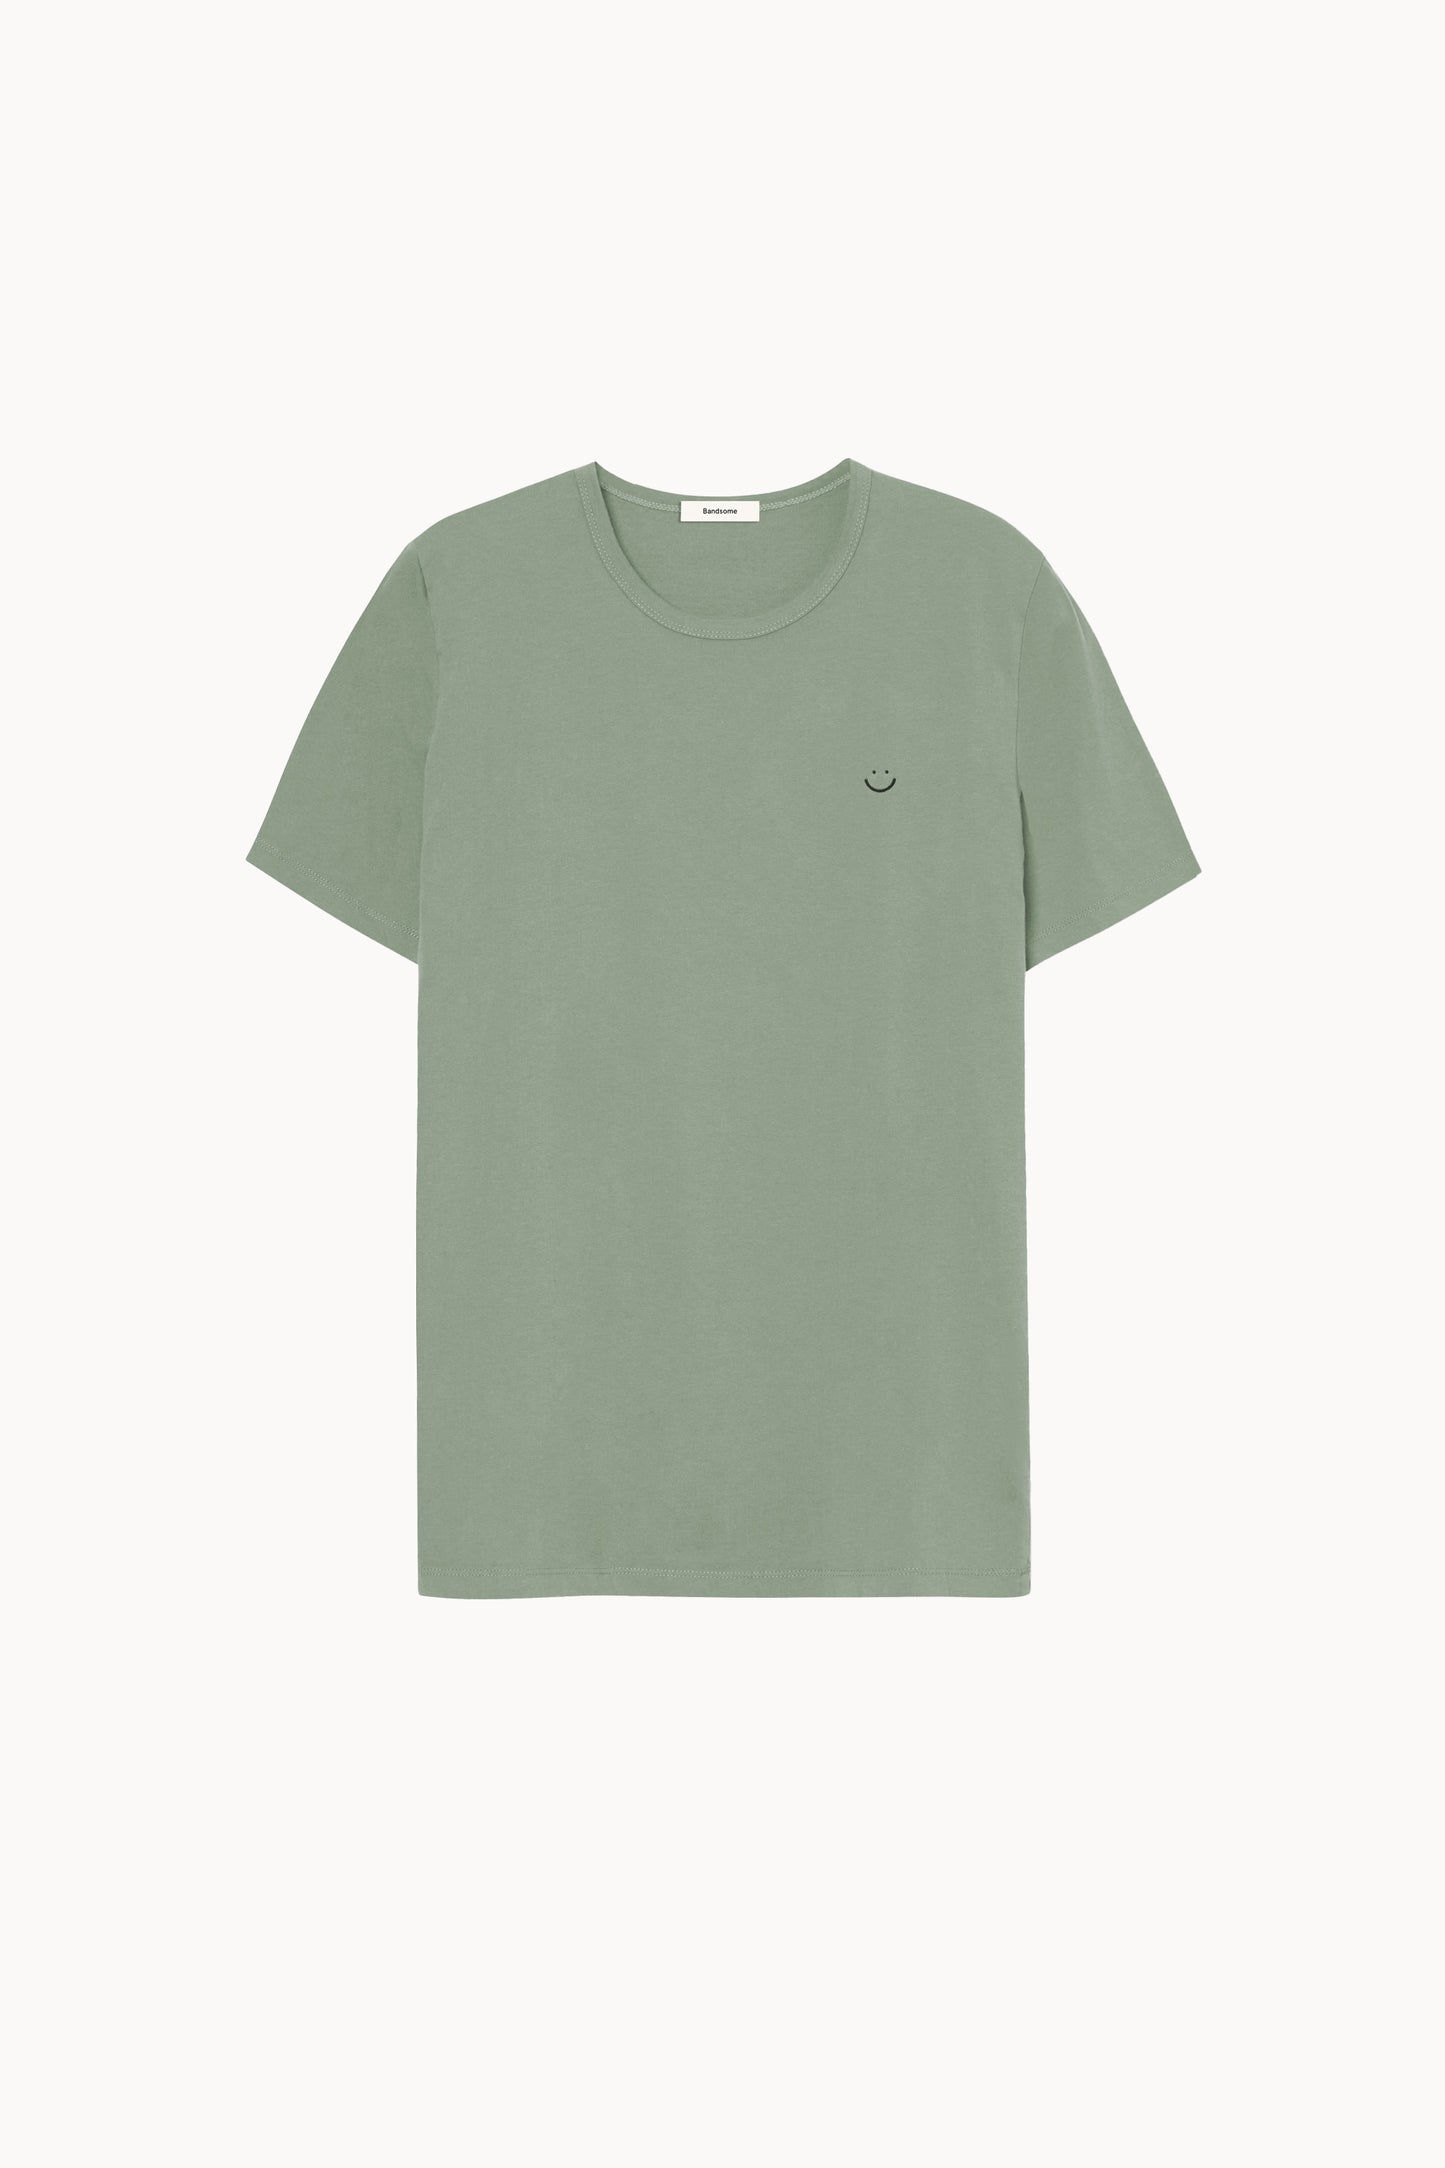 classic crew t-shirt palm smiley